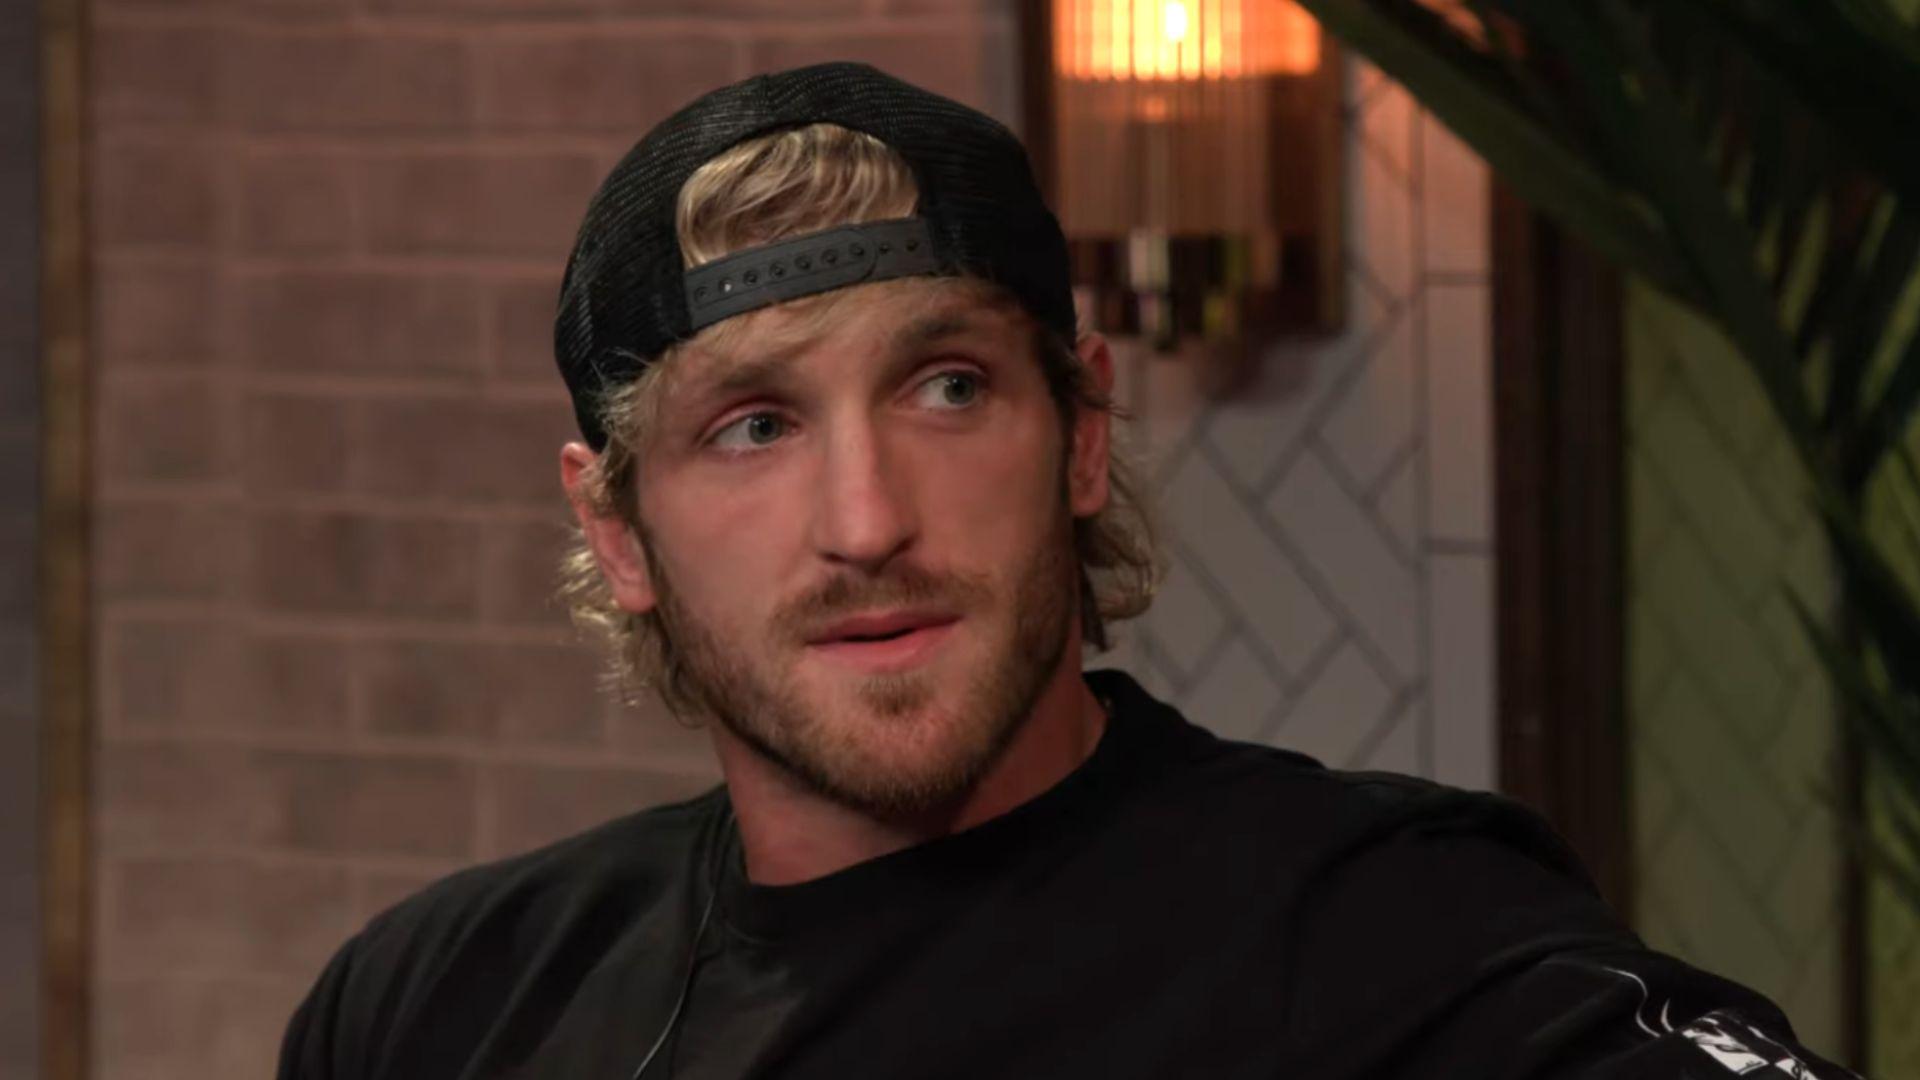 Logan Paul in black hat and shirt talking to camera on podcast couch